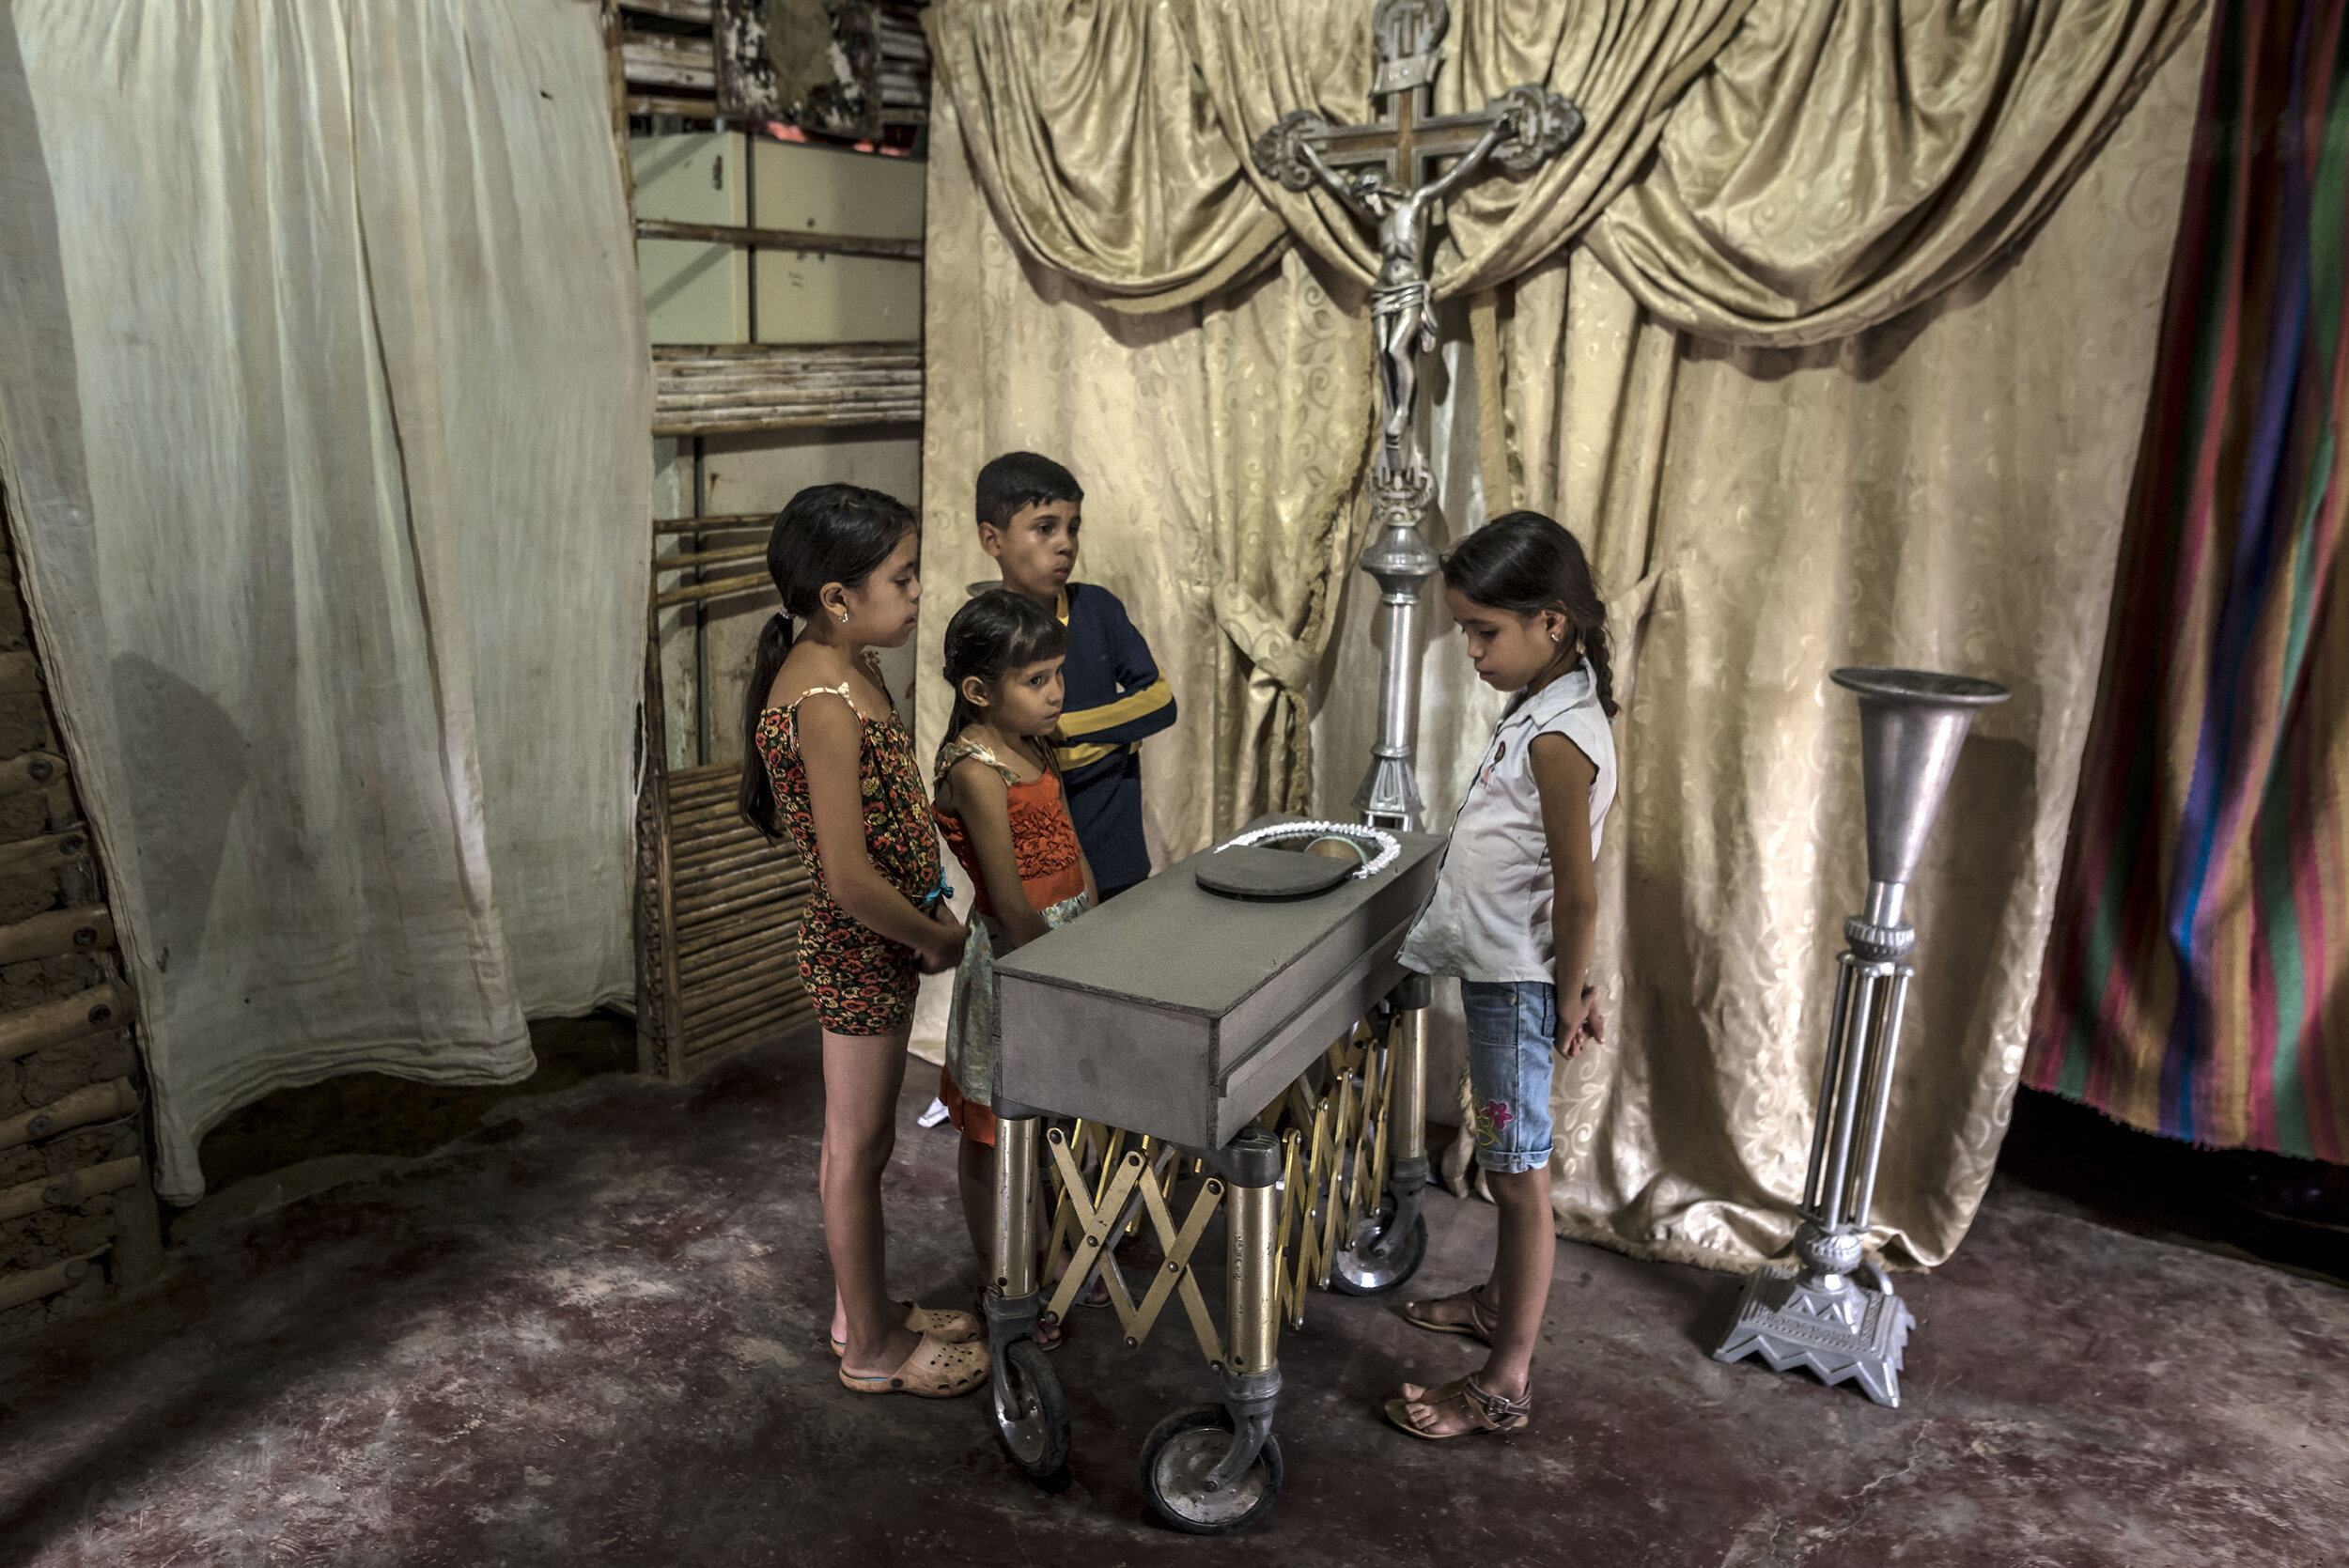  Children view the body of their 17-month old cousin, Kenyerber Aquino Merchán, who died of heart failure caused by severe malnutrition in San Casimiro, Venezeula in August 2017.  © Meridith Kohut  